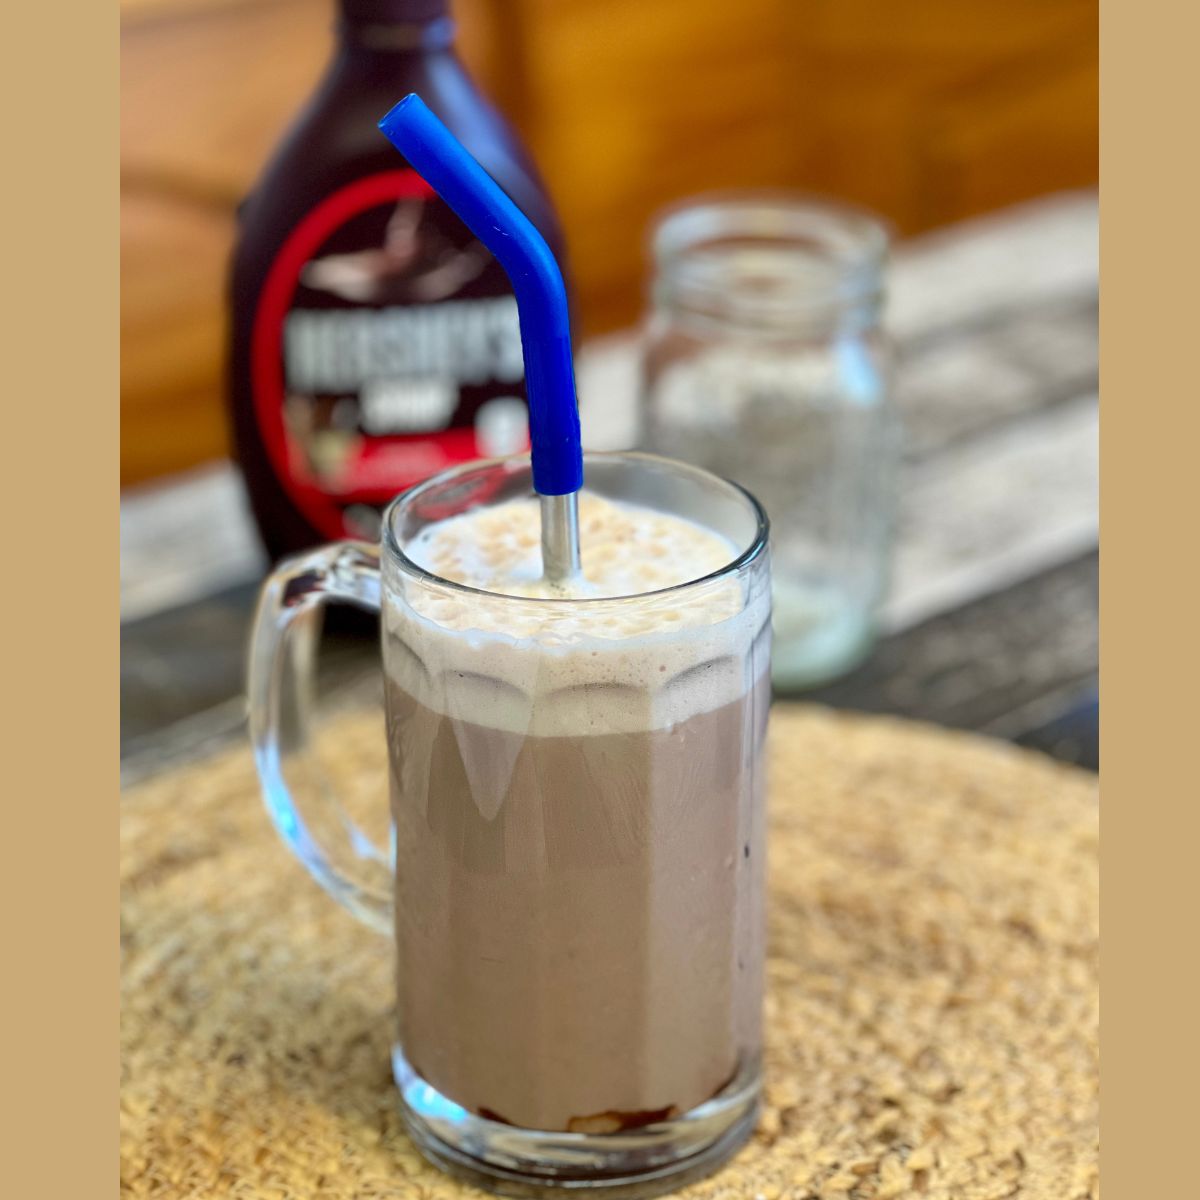 A chocolate egg cream in a glass beer mug with a blue straw in it on a table